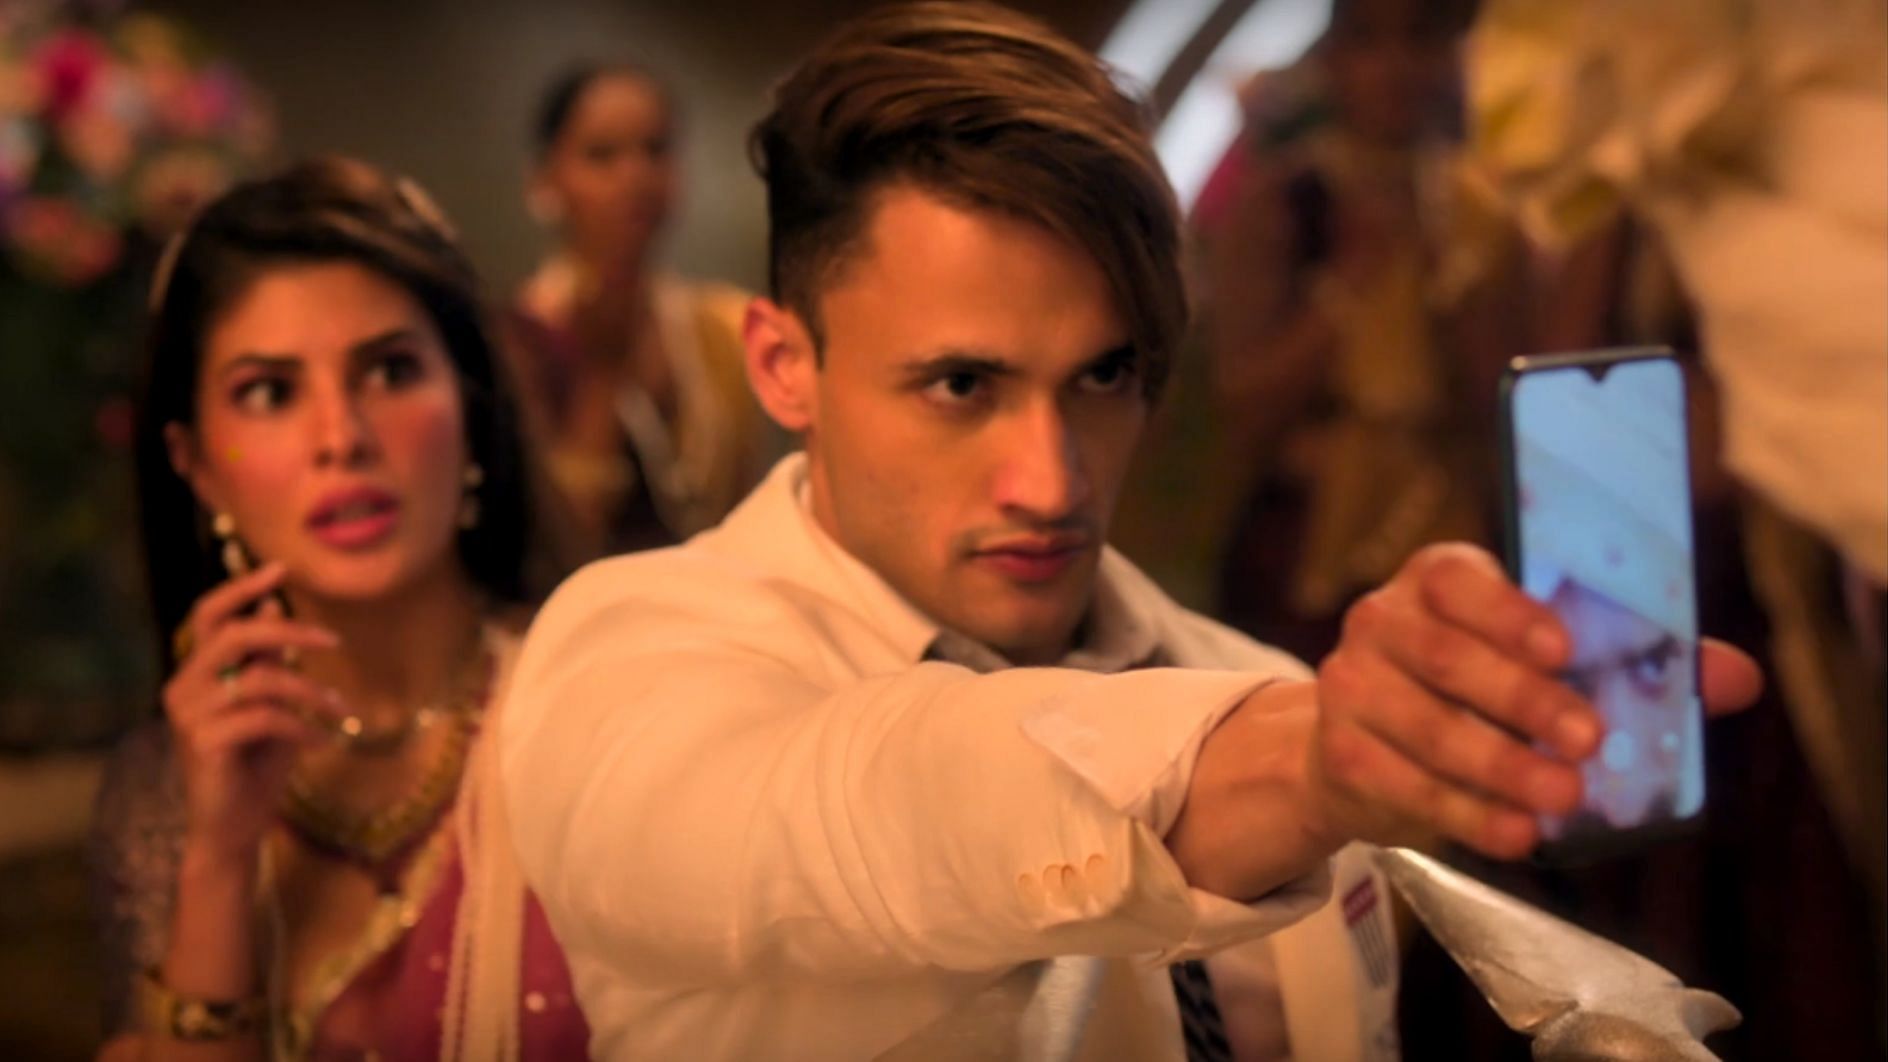 Asim and Jacqueline in a still from the music video.